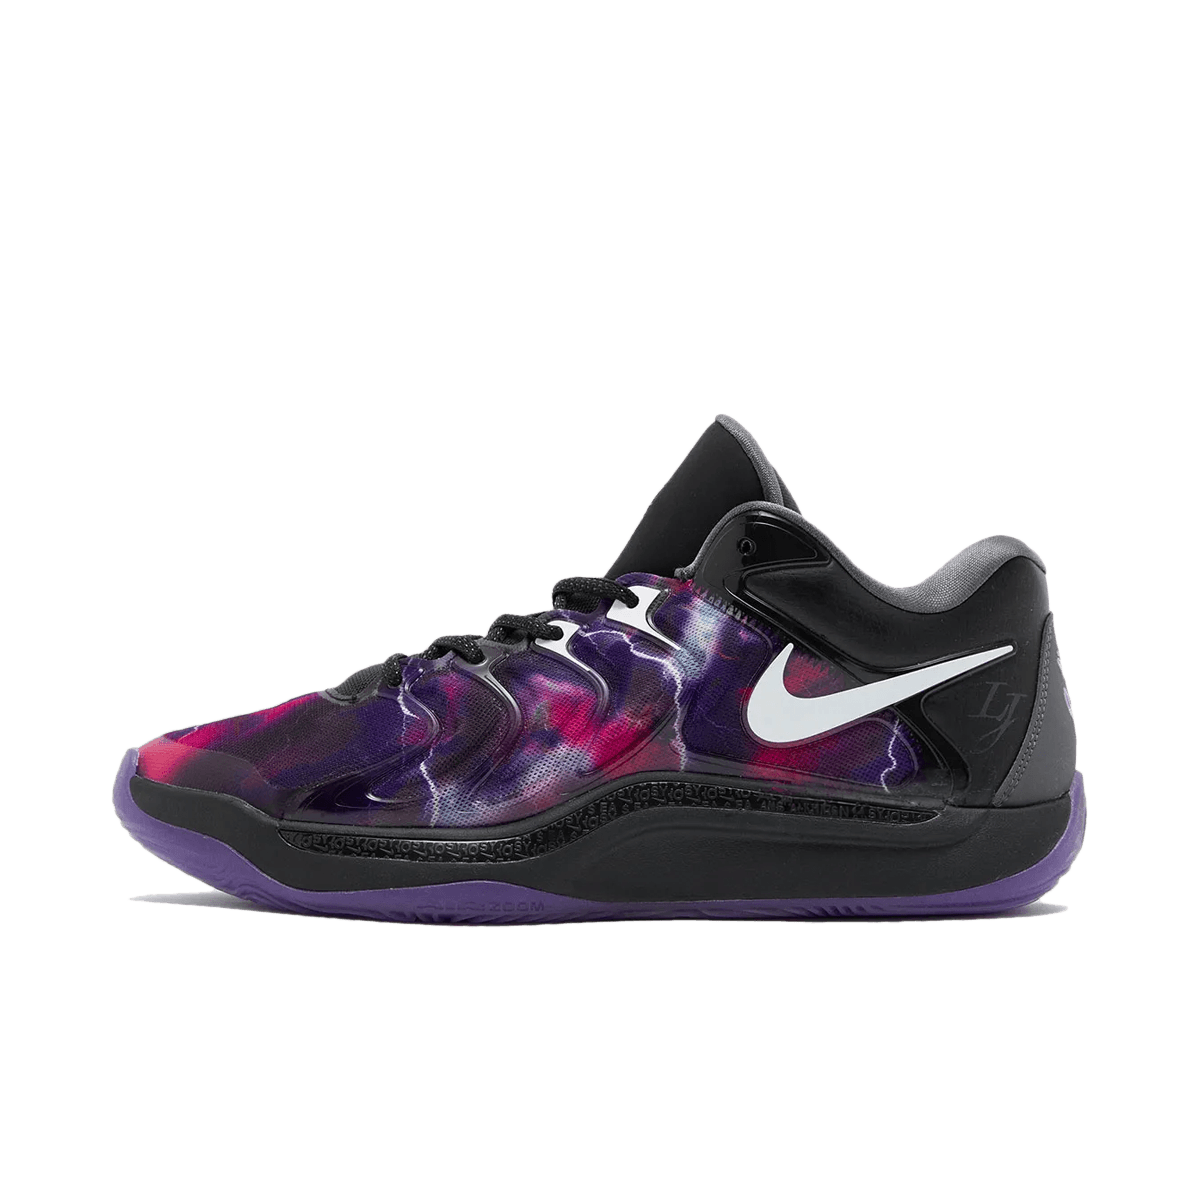 Metro Boomin x Nike KD 17 'Atomic Violet' - Producer Pack